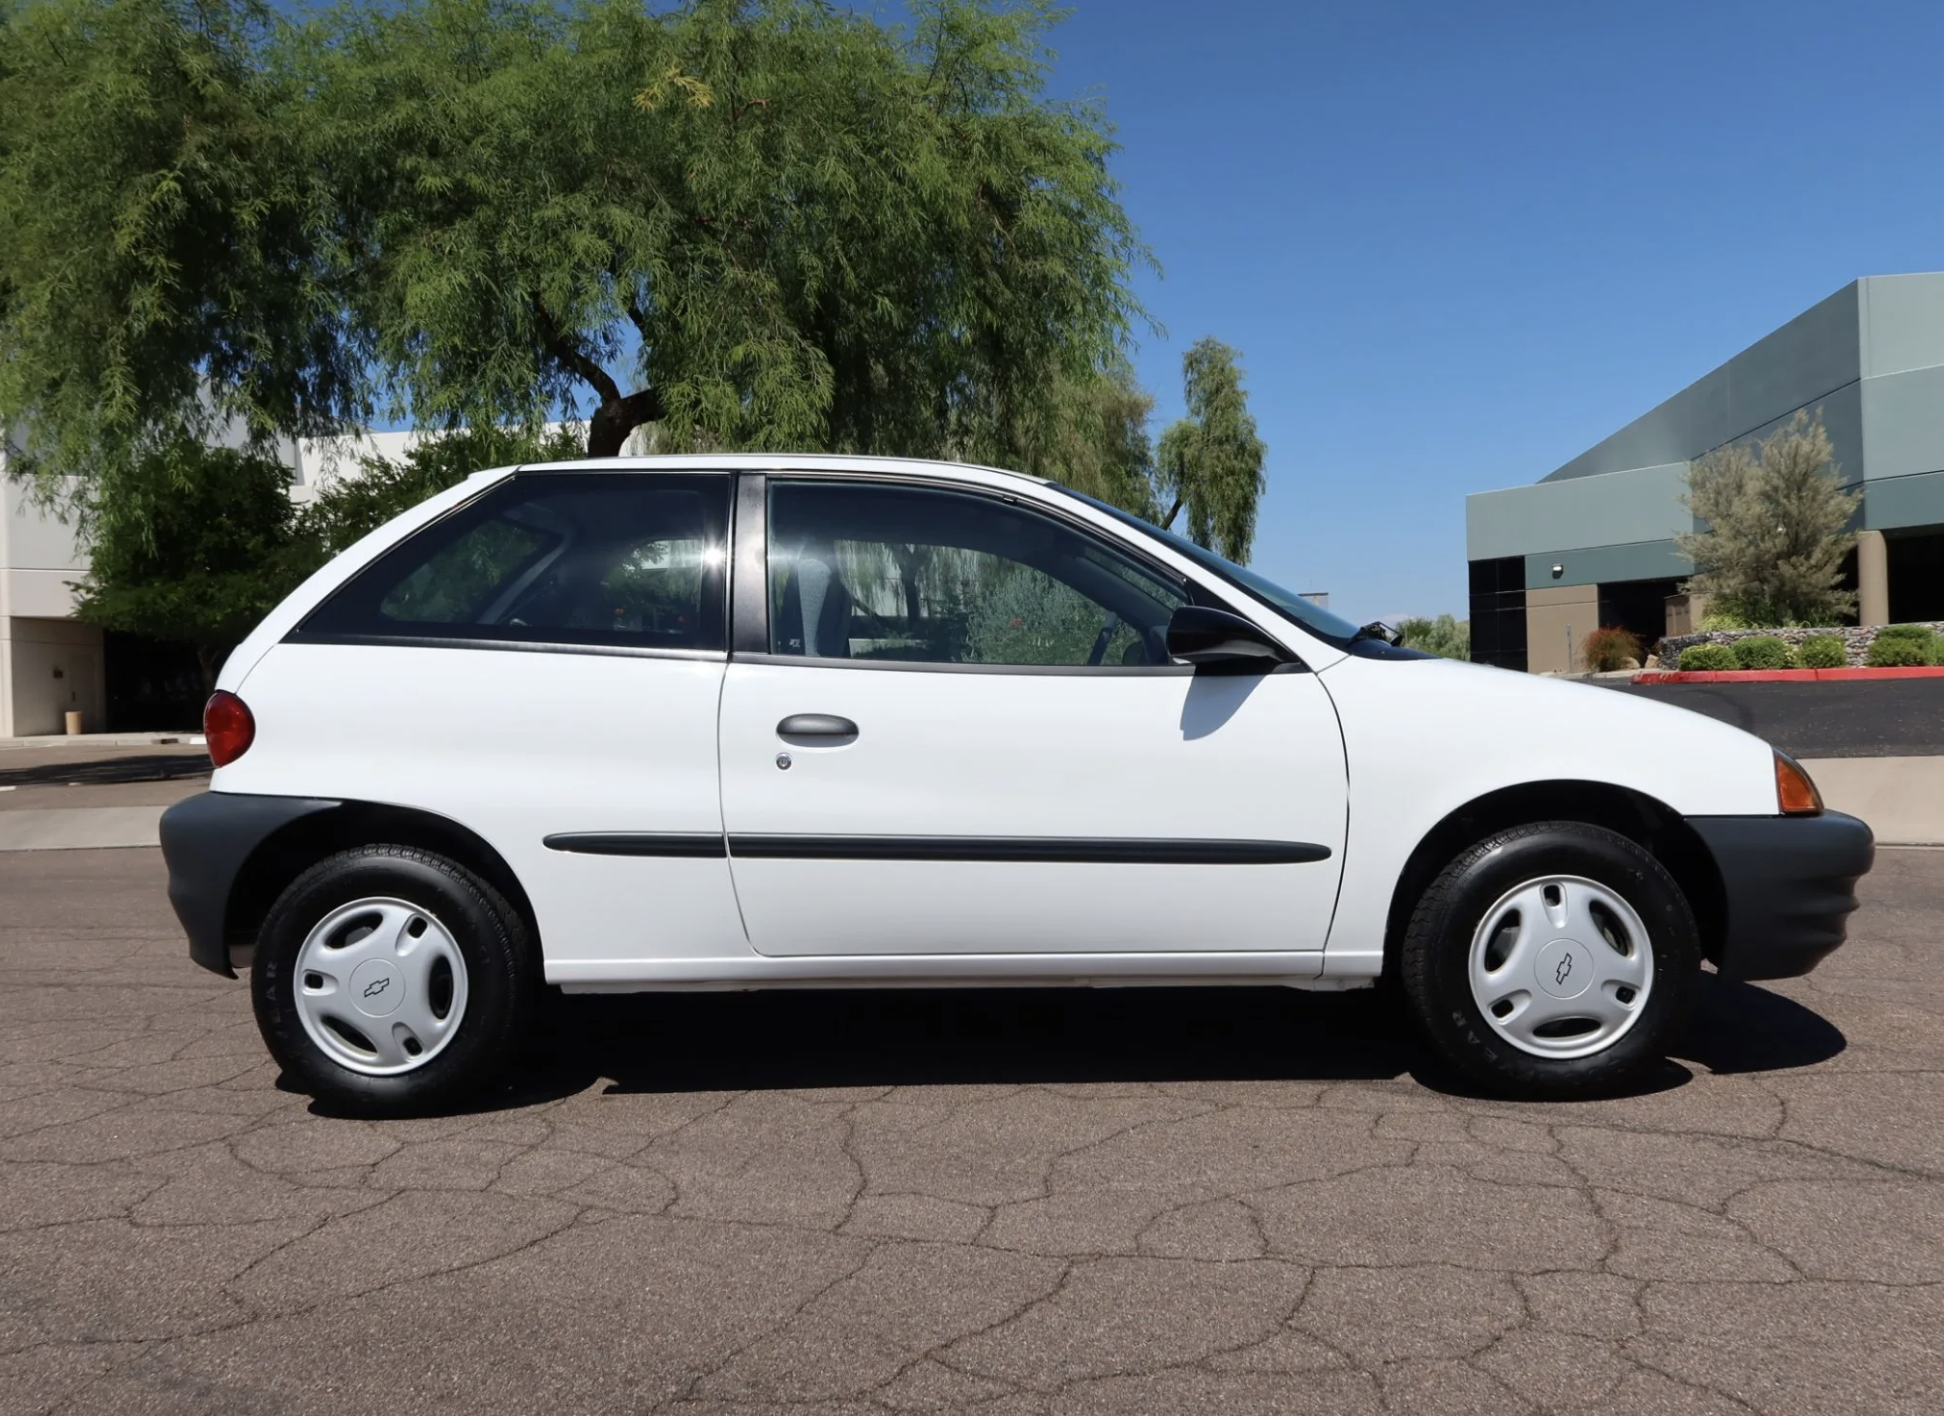 400-Mile 2000 Chevrolet Metro Fetches $18,200 on Bring a Trailer